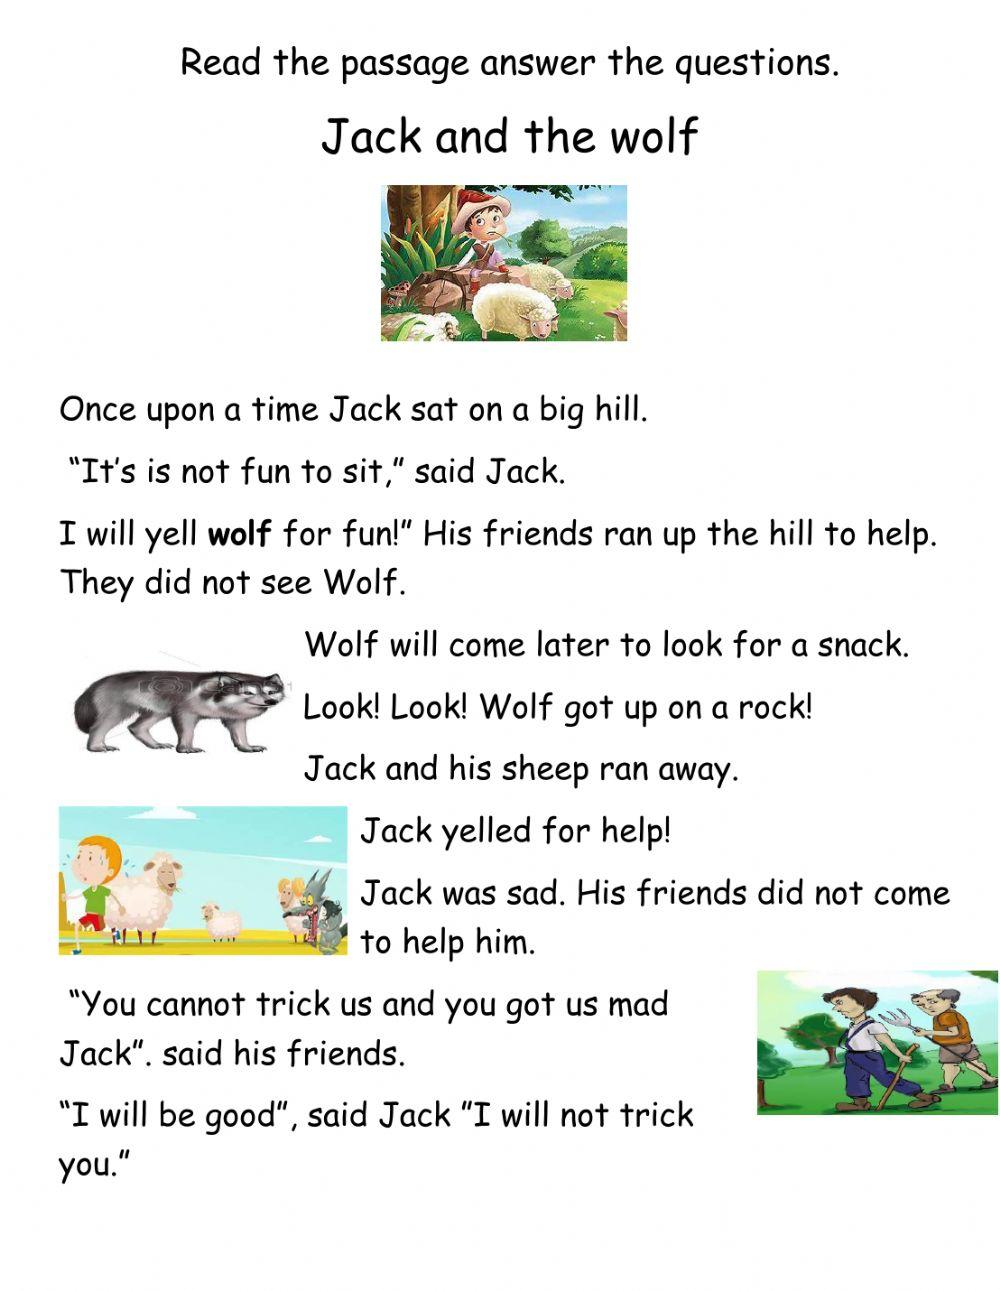 Jack and the wolf